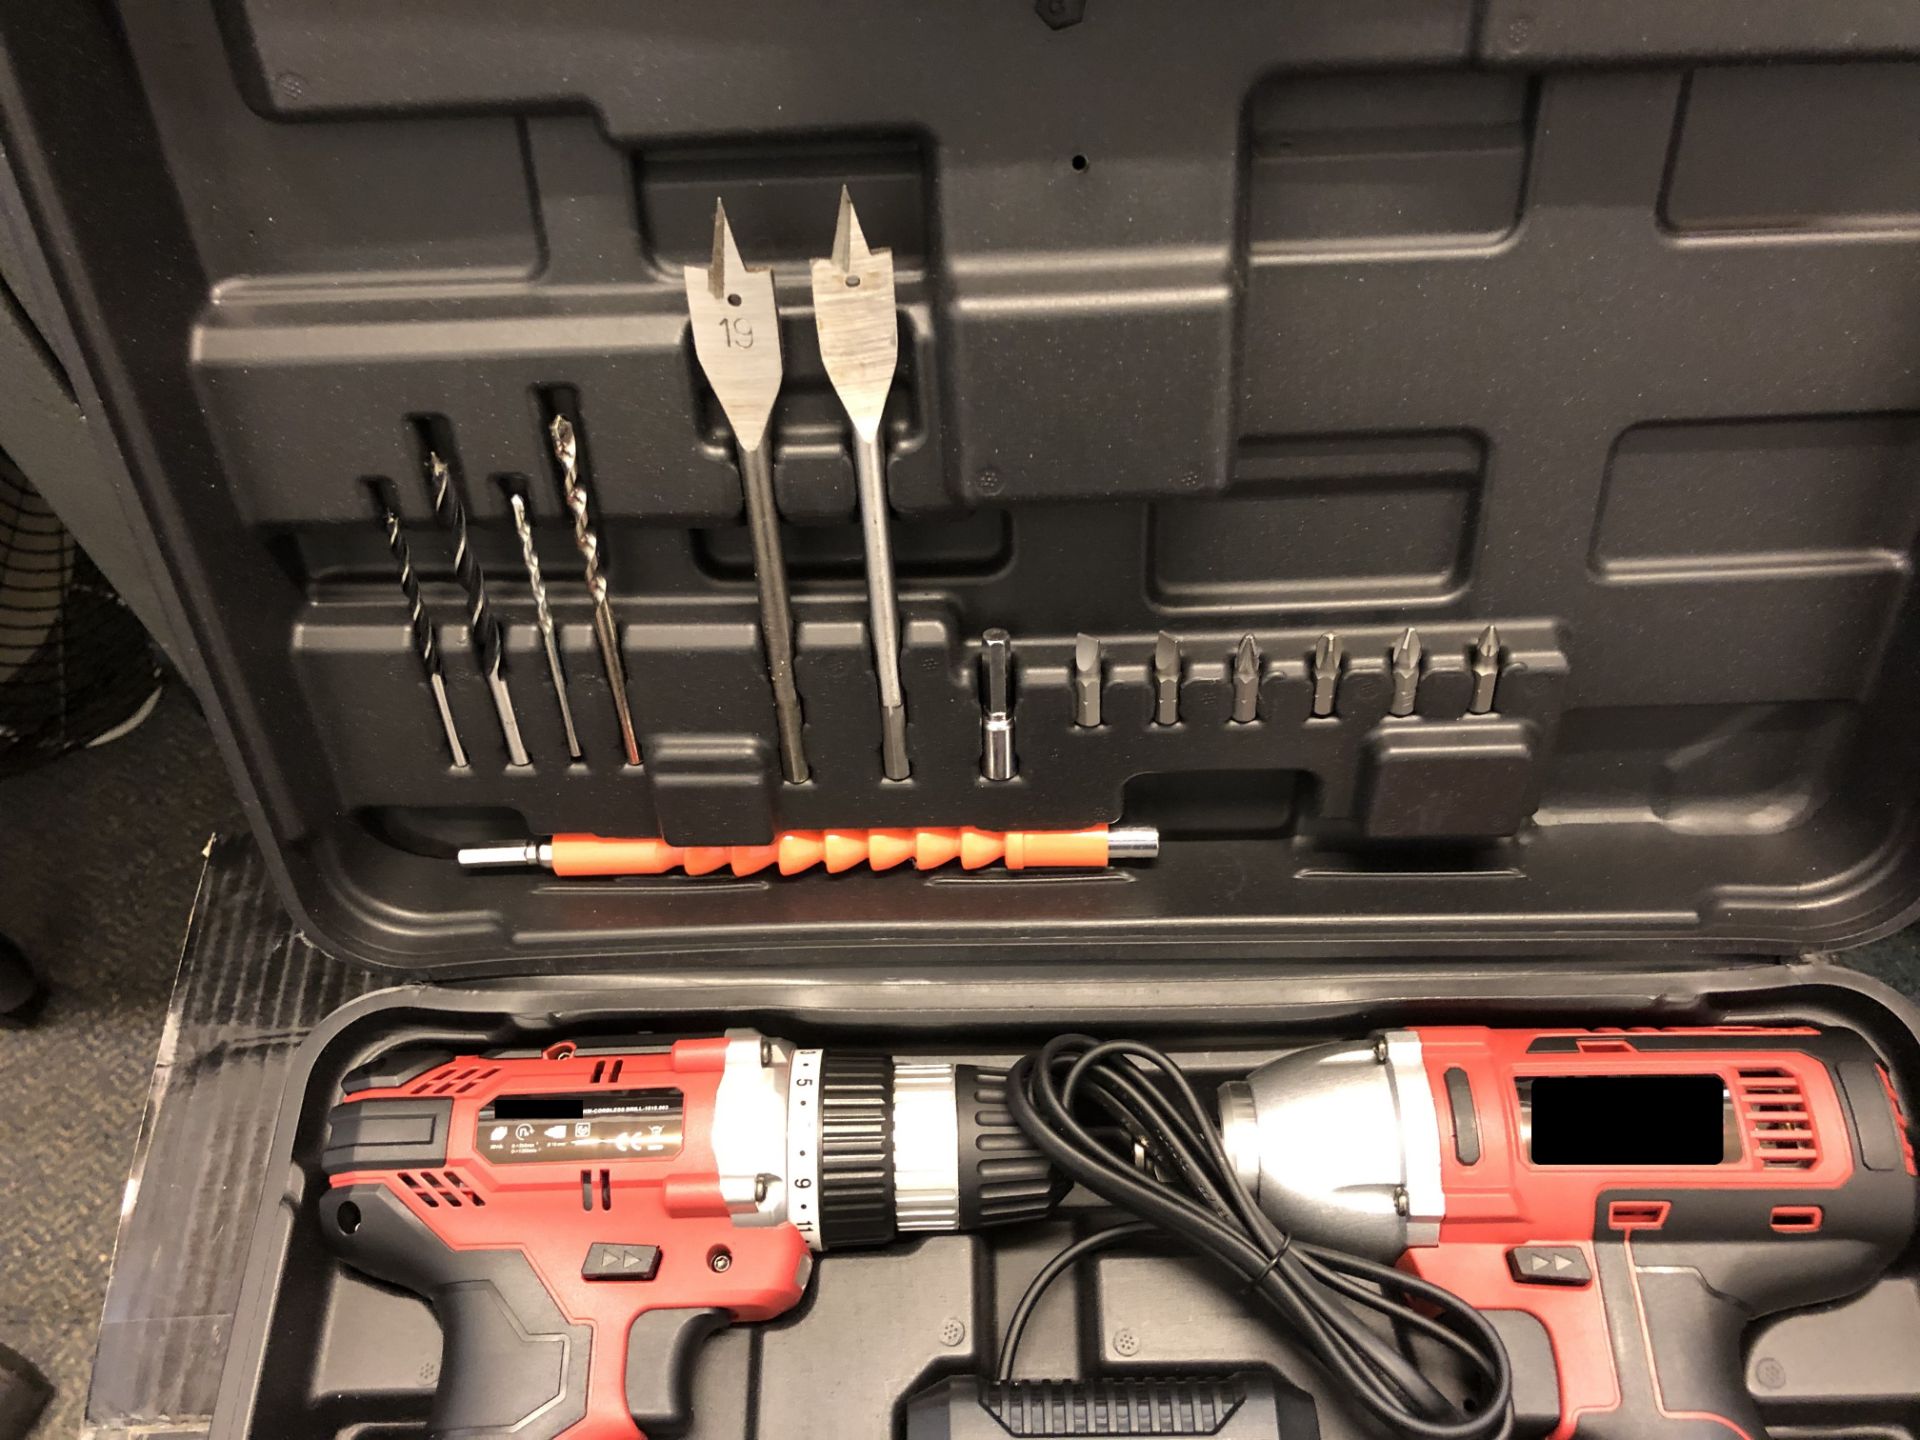 V Brand New 36V Twin Pack Cordless Drill/Driver And Cordless Impact Driver - 1 Hour Charge - 3.0Ah - Image 2 of 3